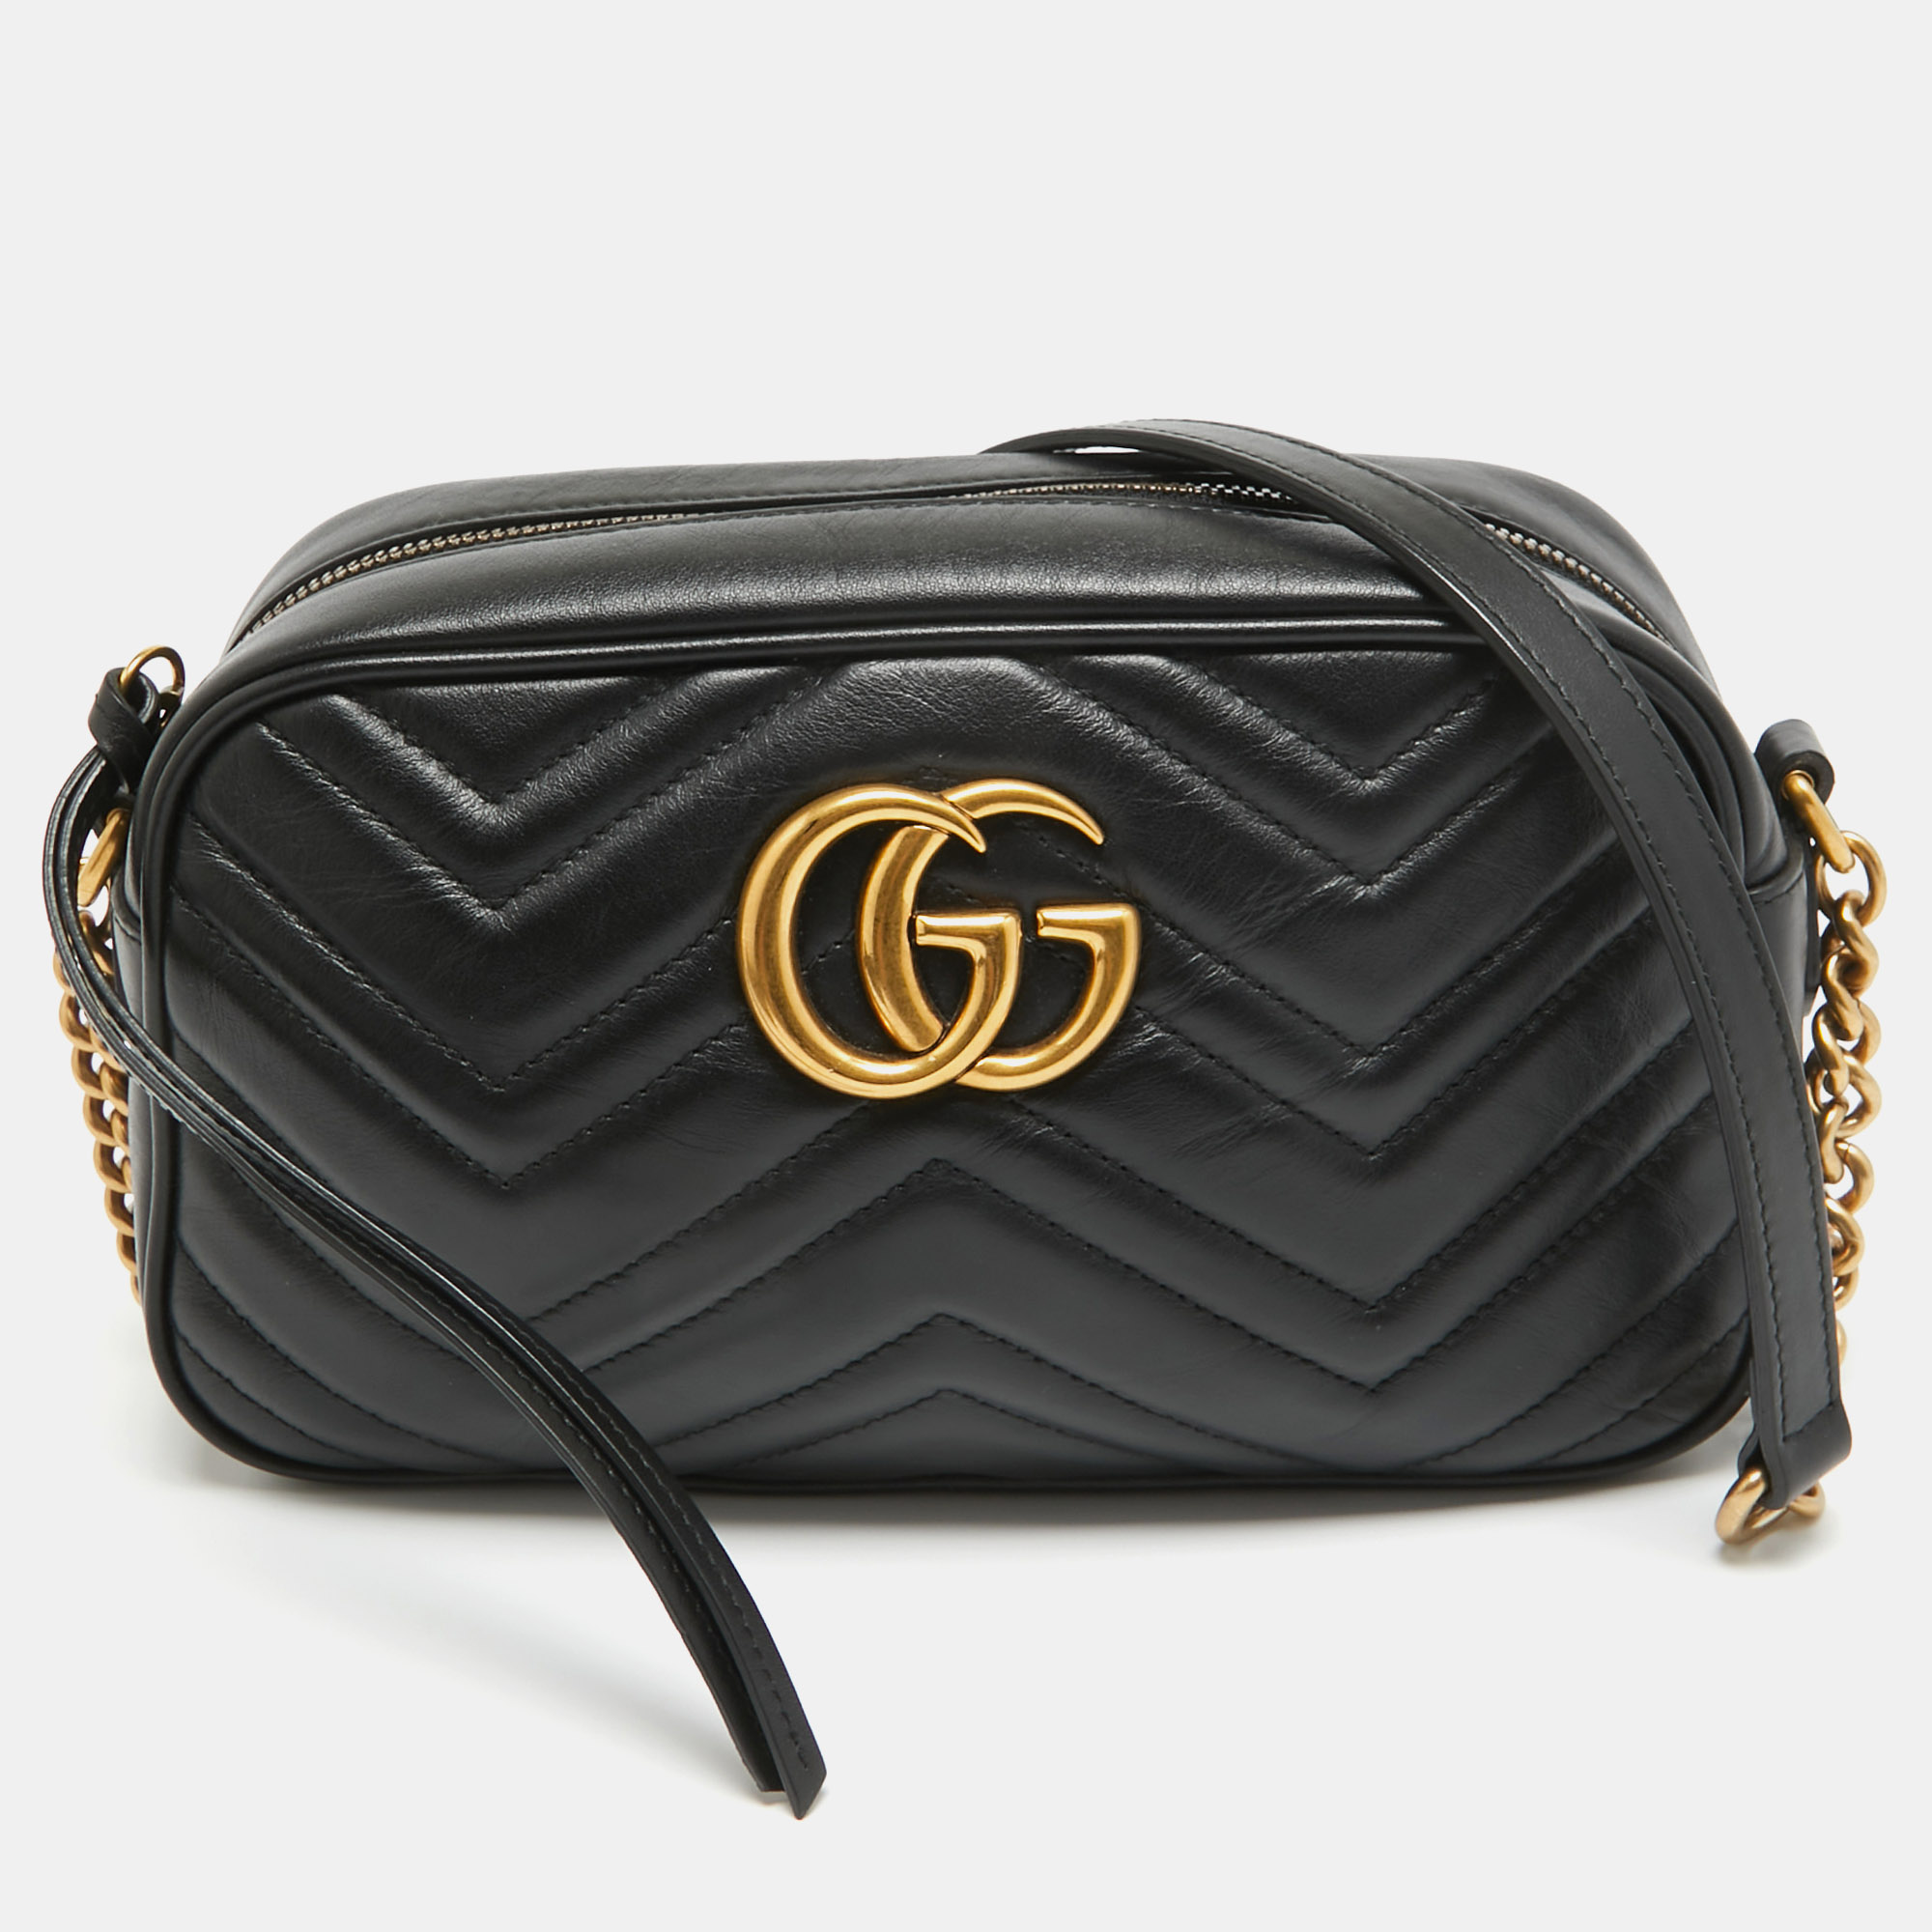 The Gucci bag exudes timeless elegance. Crafted from supple black leather its quilted matelassé pattern is adorned with the iconic GG logo. The shoulder bag seamlessly combines luxury and sophistication making it a must have accessory for the fashion conscious.